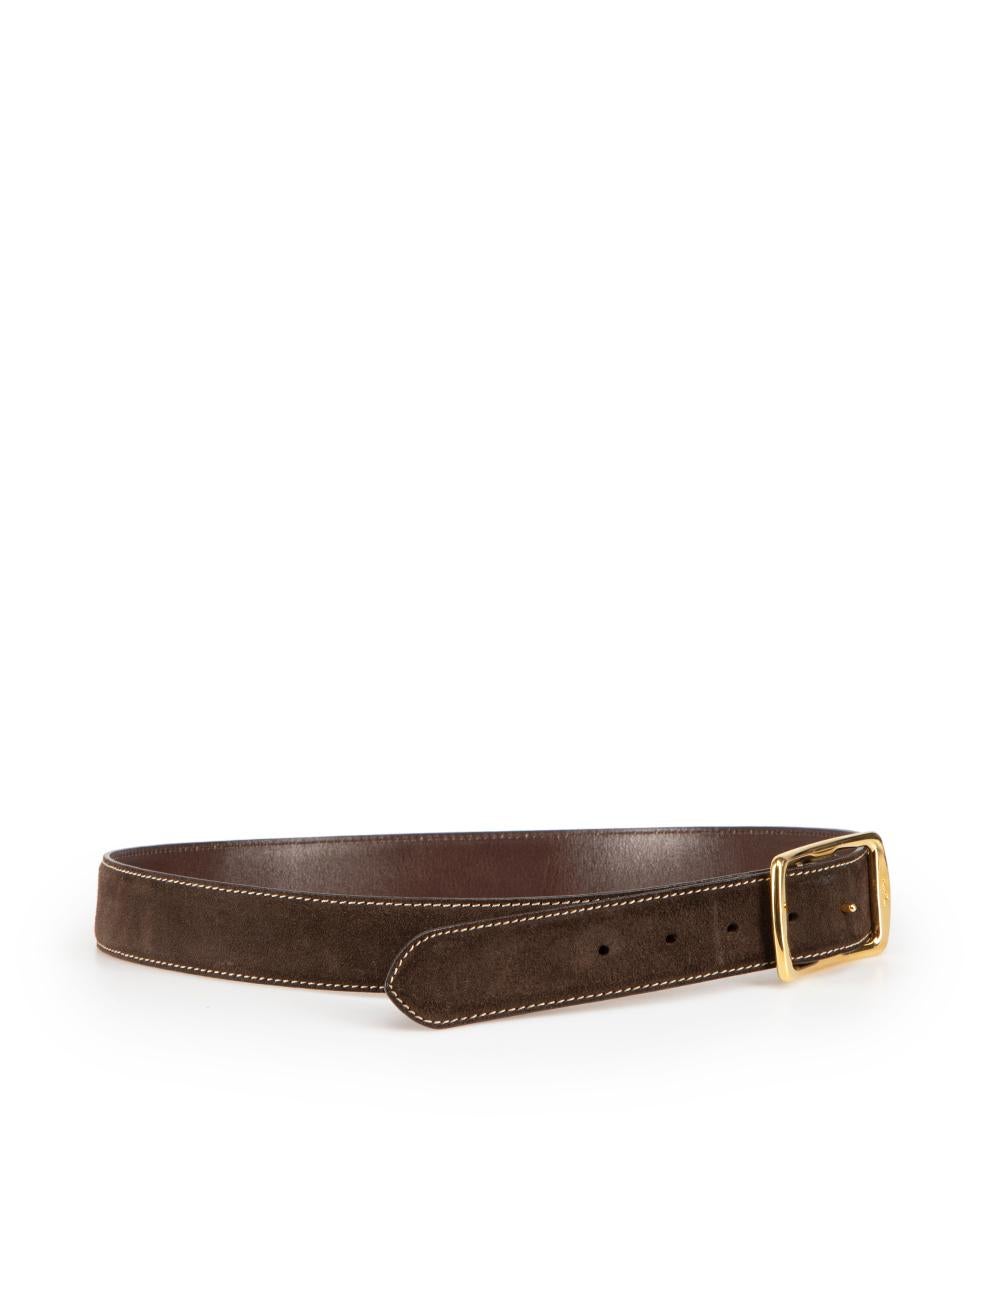 CONDITION is Very good. Minimal wear to belt is evident. Minimal wear to the sixth belt hole with it remaining unpunched and dented on this used Loro Piana designer resale item.

Details
Brown
Suede
Belt
Gold buckle
Contrast stitch
 
Made in Italy